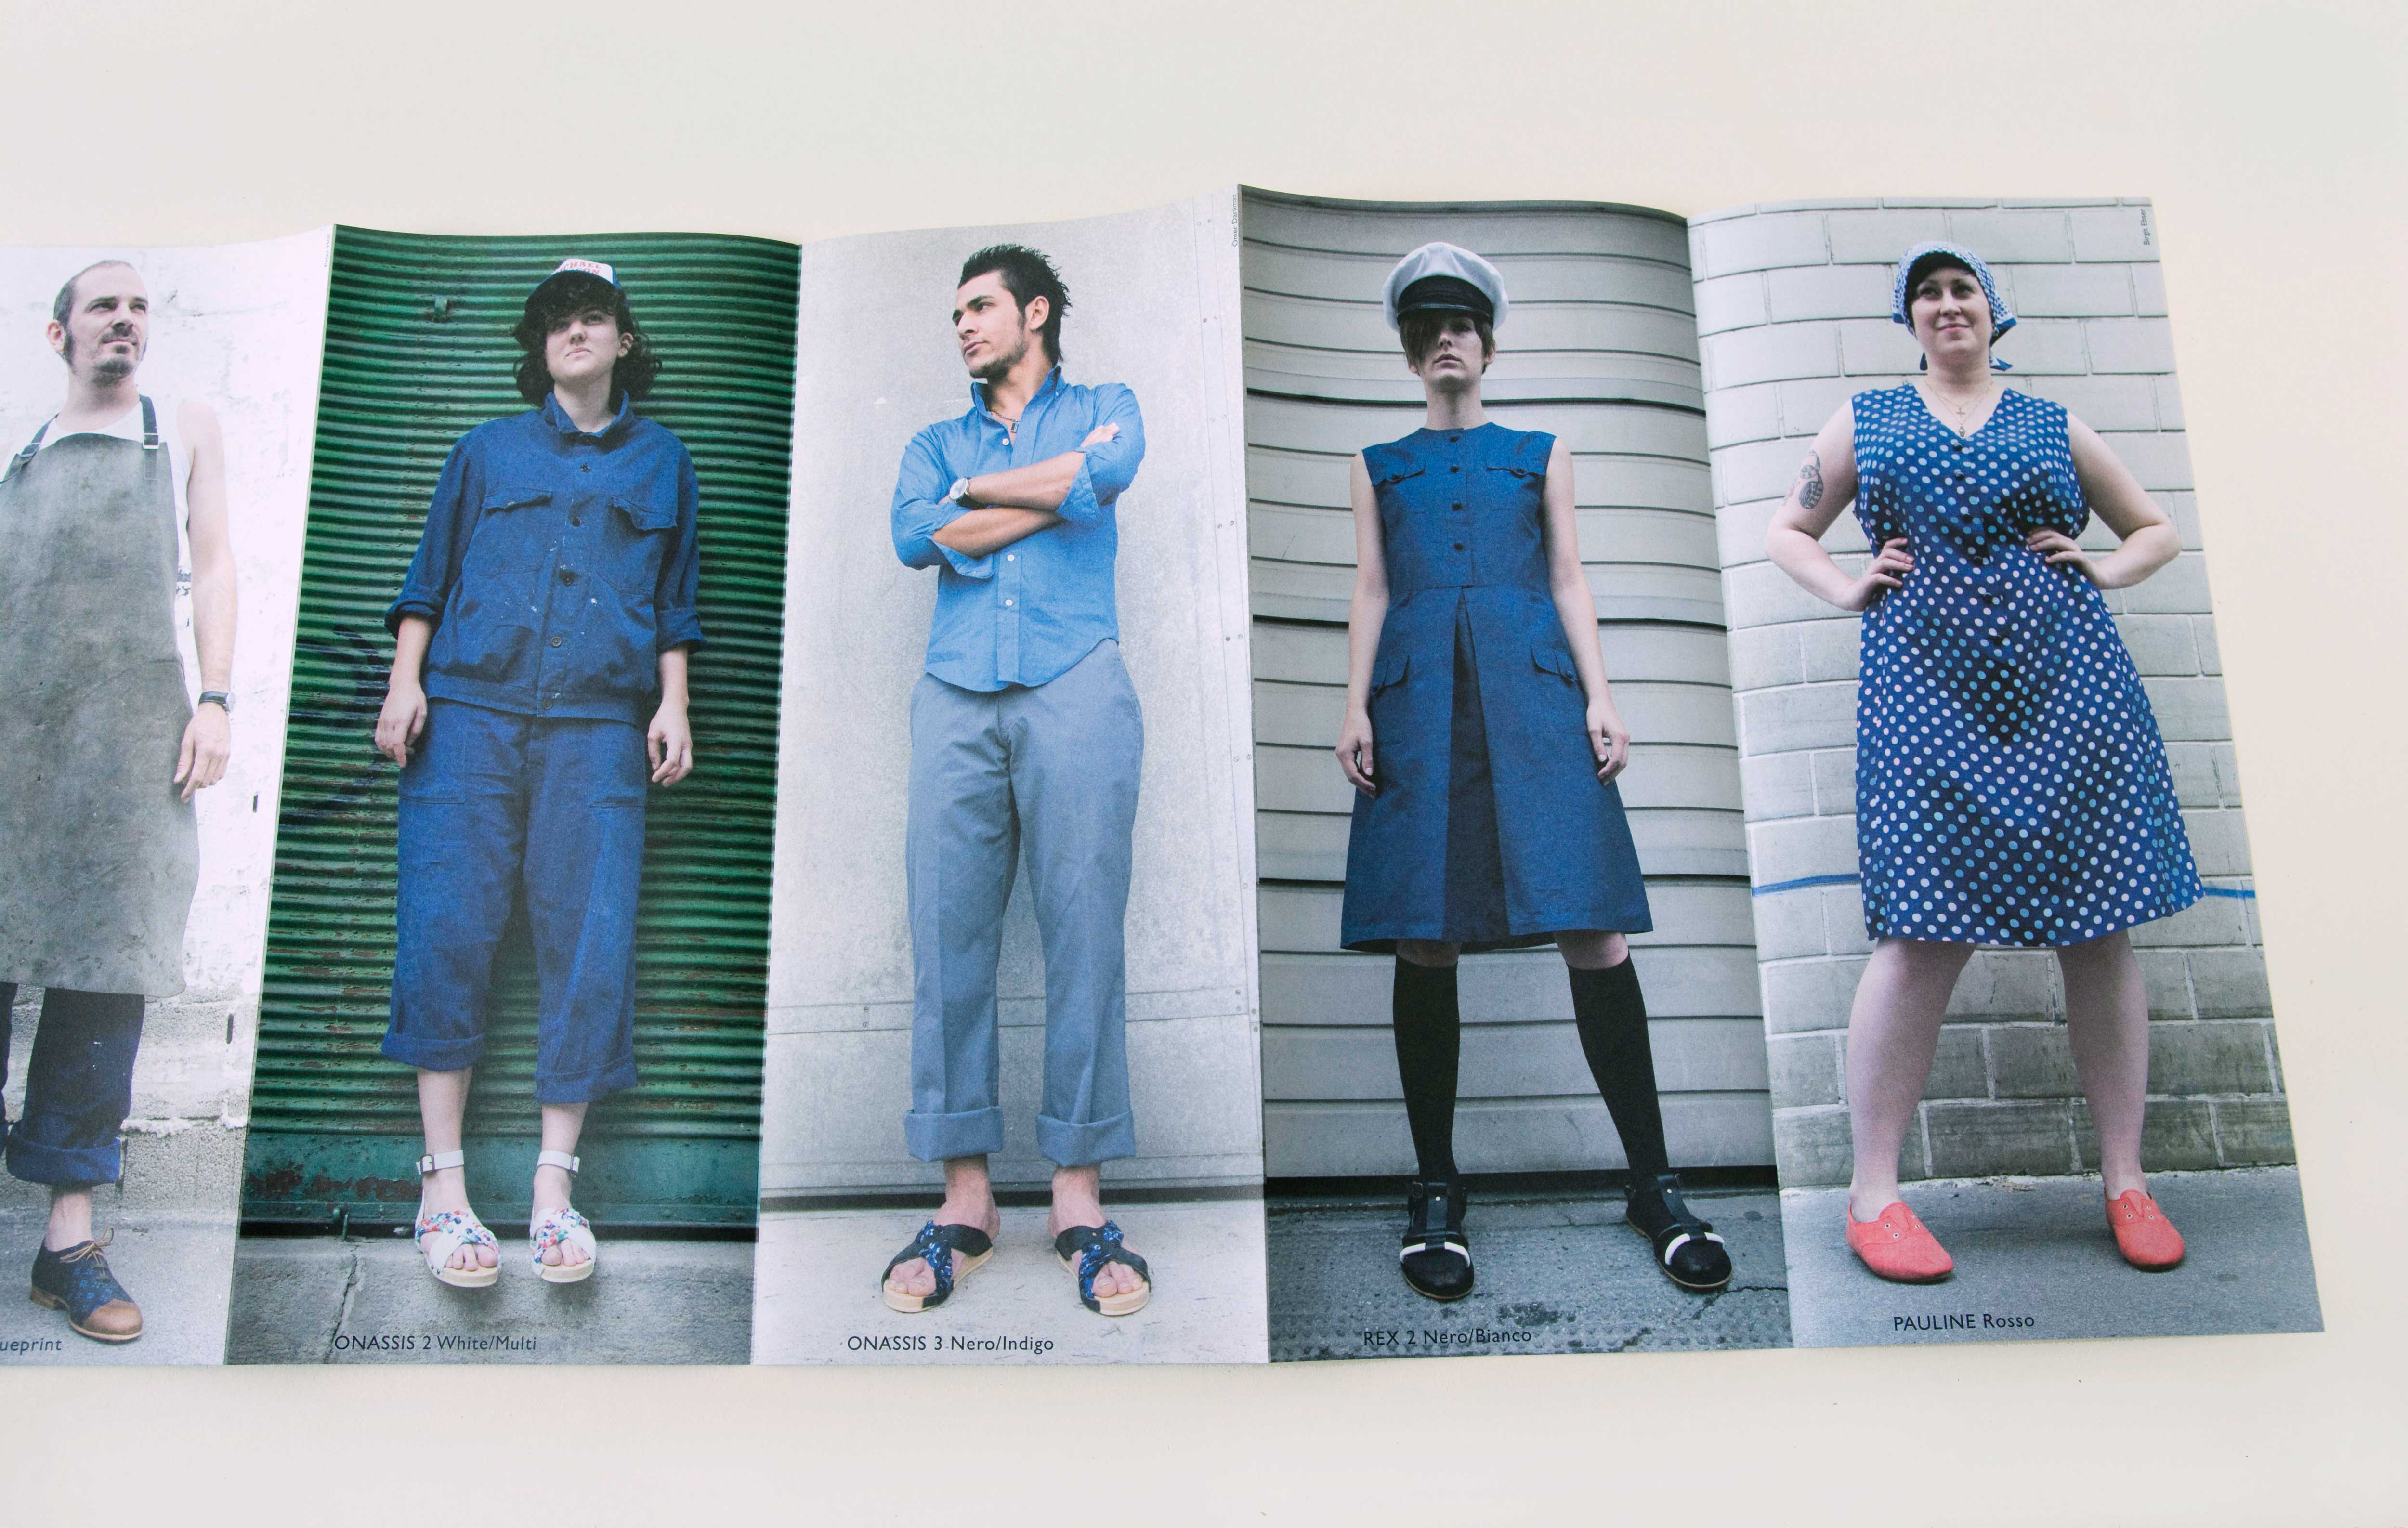 Unfolded brochure. Full-page photos side by side. Women and men standing on the street in front of various backgrounds. Brick wall, wall with tags, old shutter or a garage door. Small font overlayed at bottom of each photo.